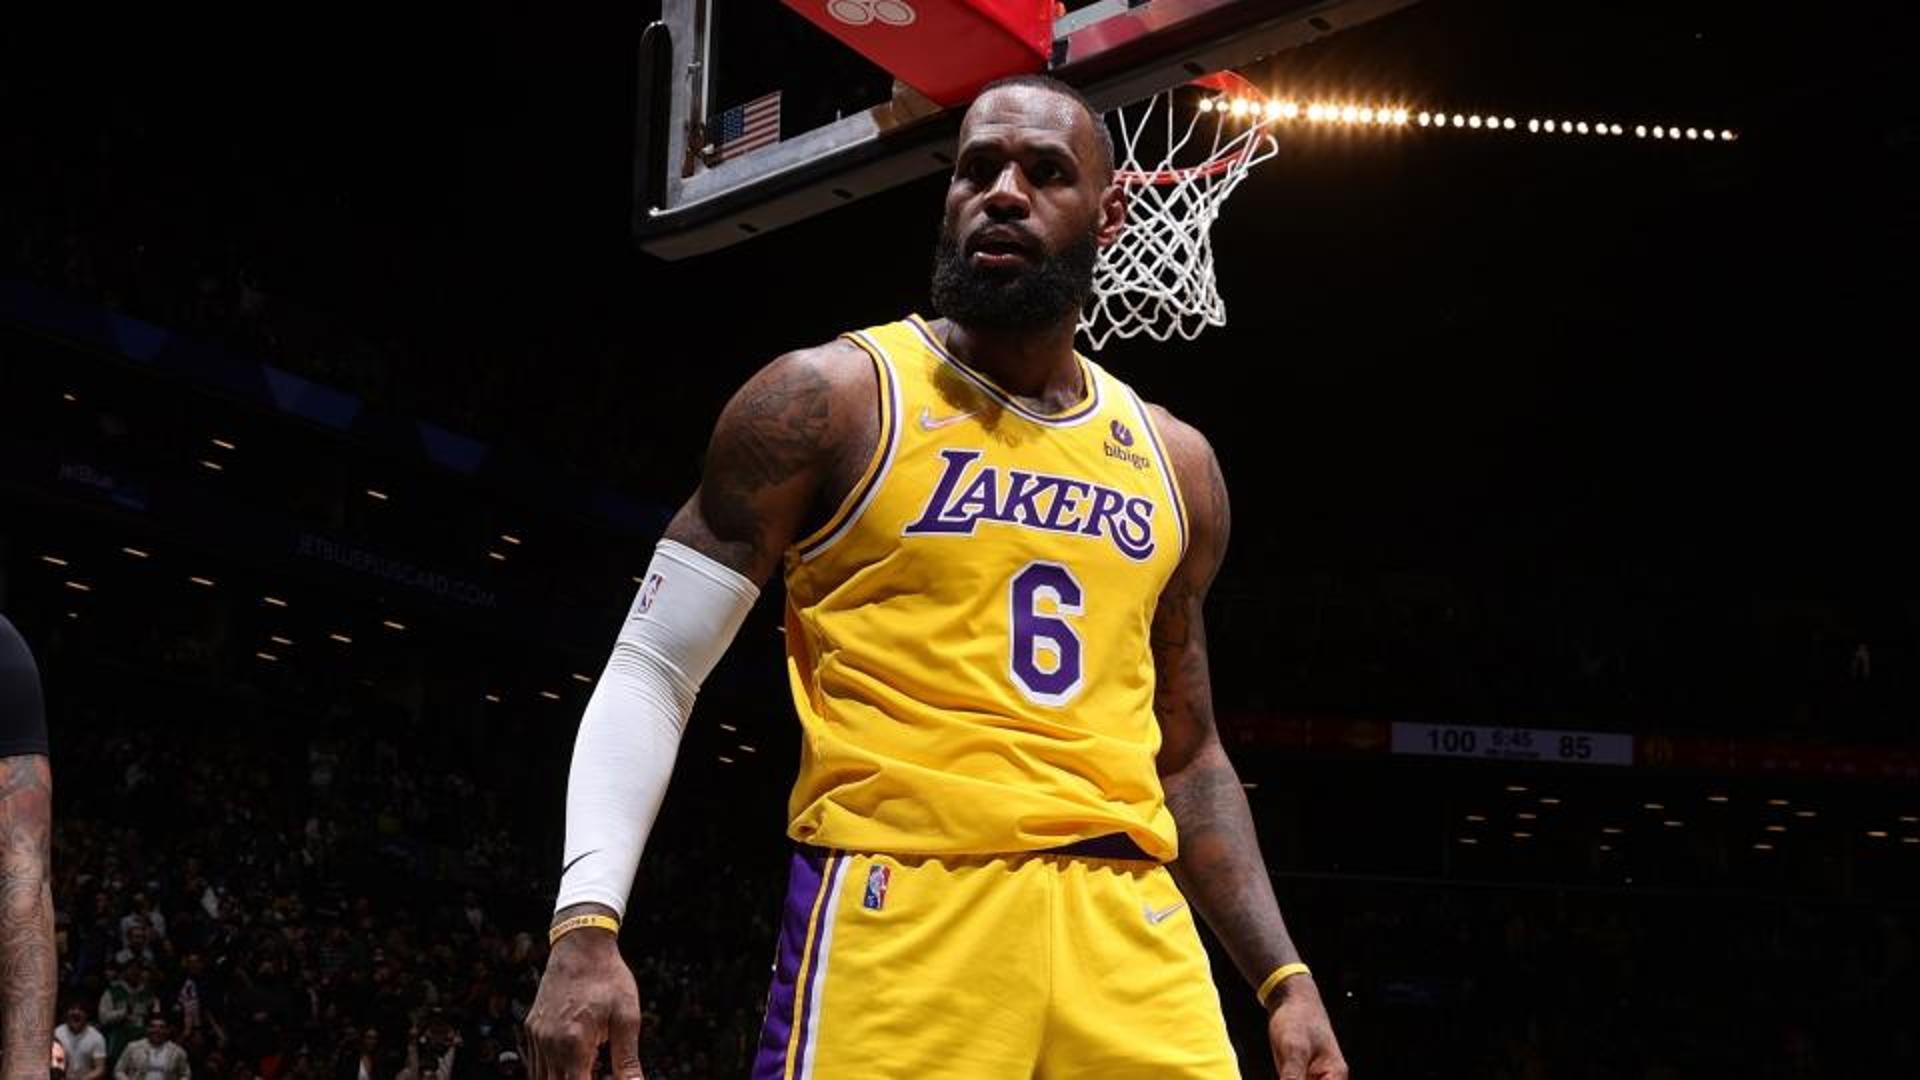 LeBron James in a file photo. (Image credits: twitter)